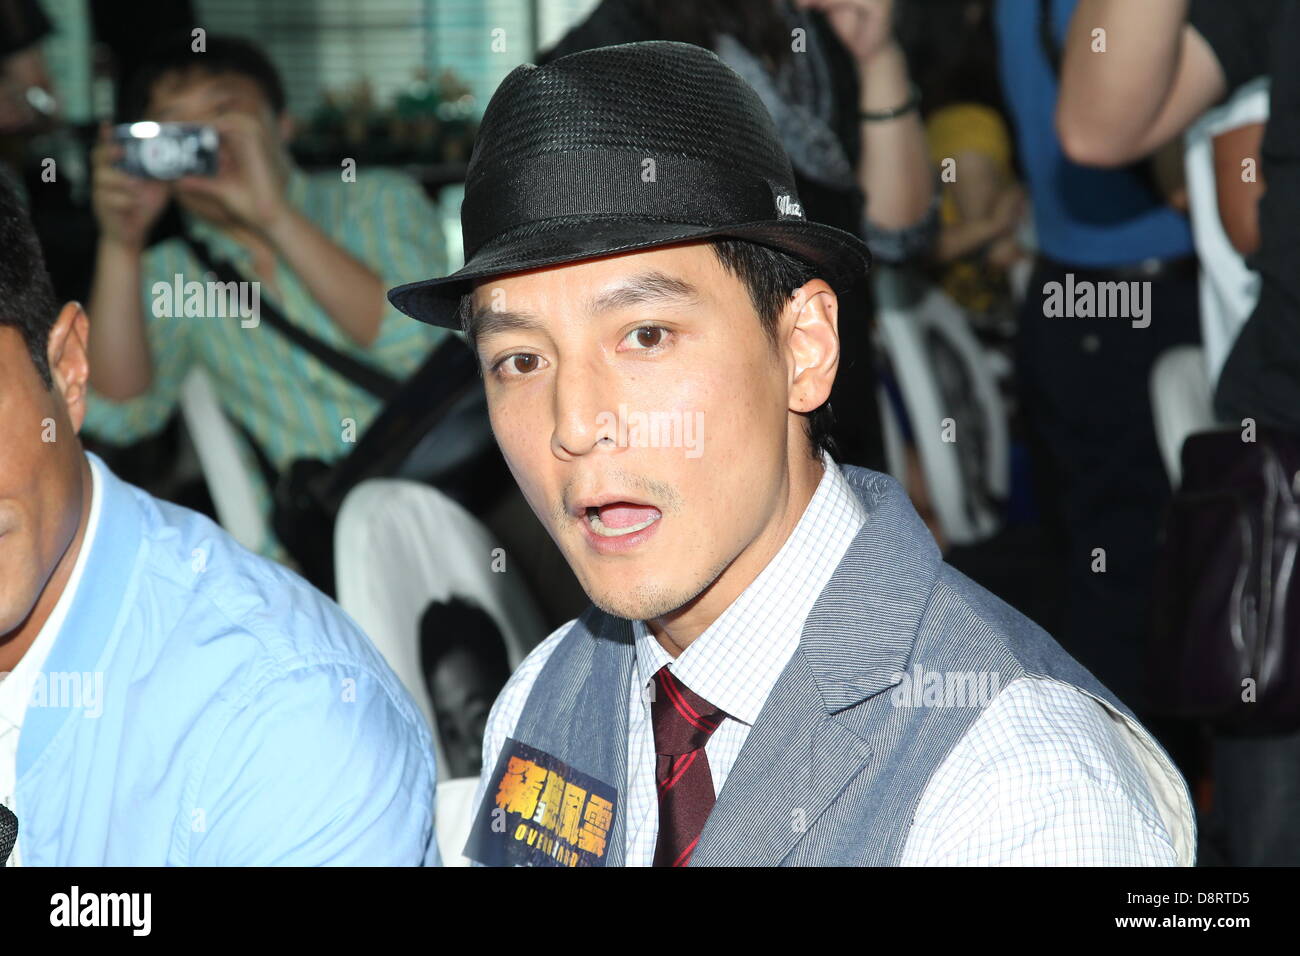 Daniel Wu at opening ceremony of movie Overheard 3 in Hong Kong, China on Monday June 03, 2013. Stock Photo